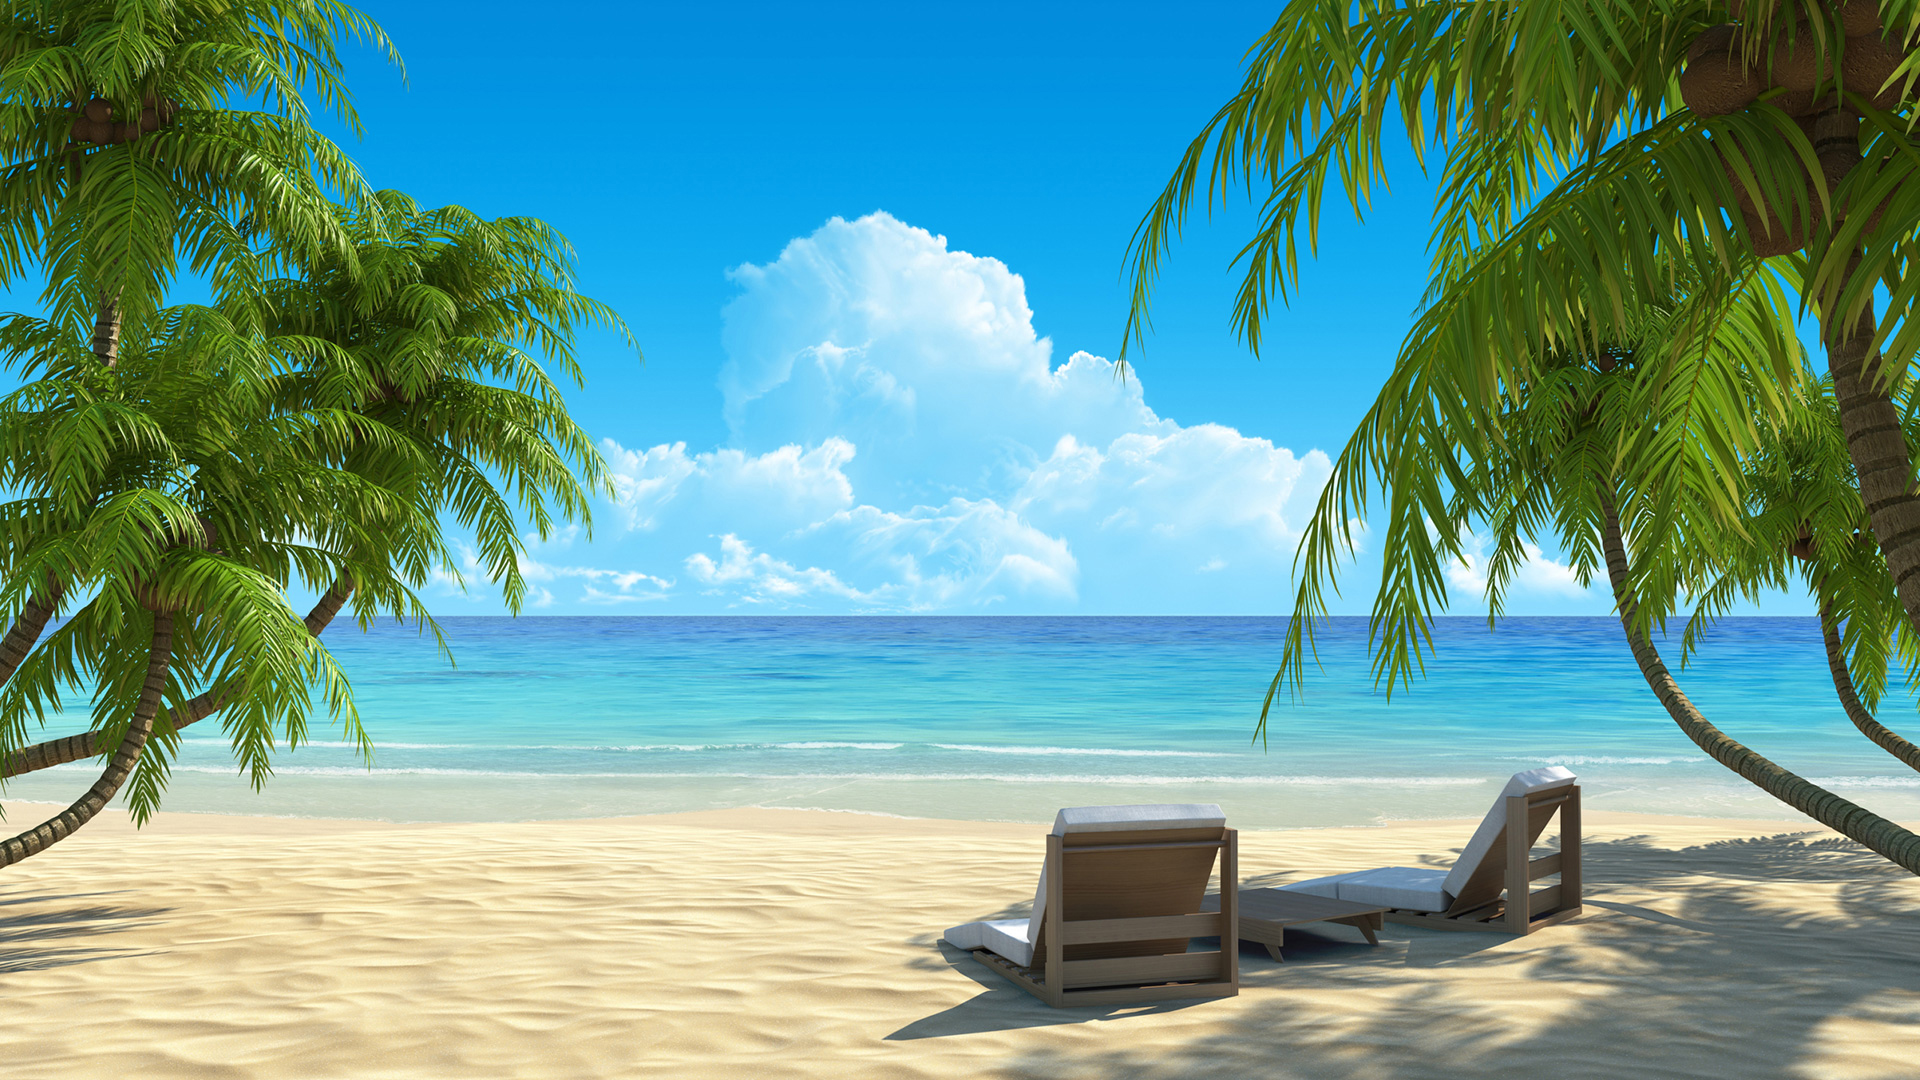 Beach Relaxing Chair On Sand With Palm Trees Each Side 2K Beach